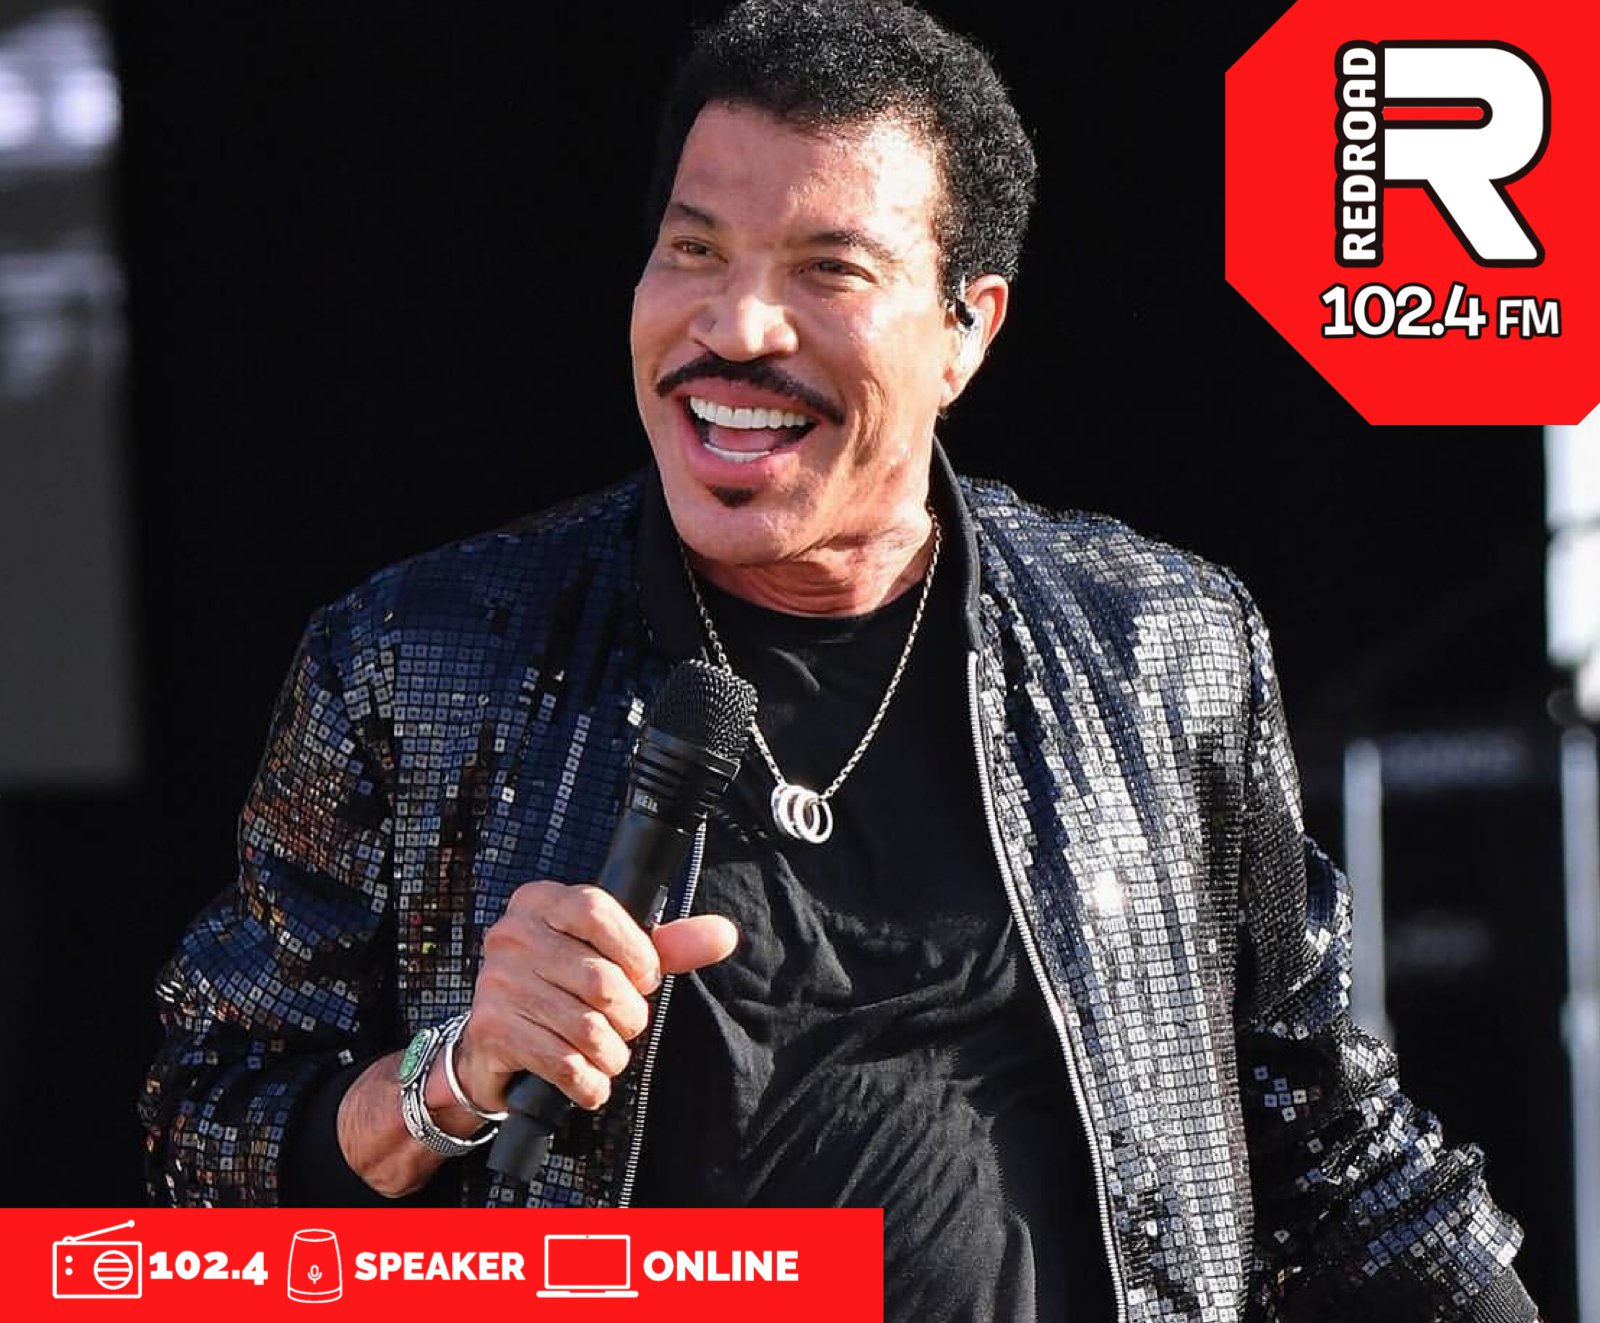 Happy Birthday Lionel Richie! What s your fave Lionel song? 